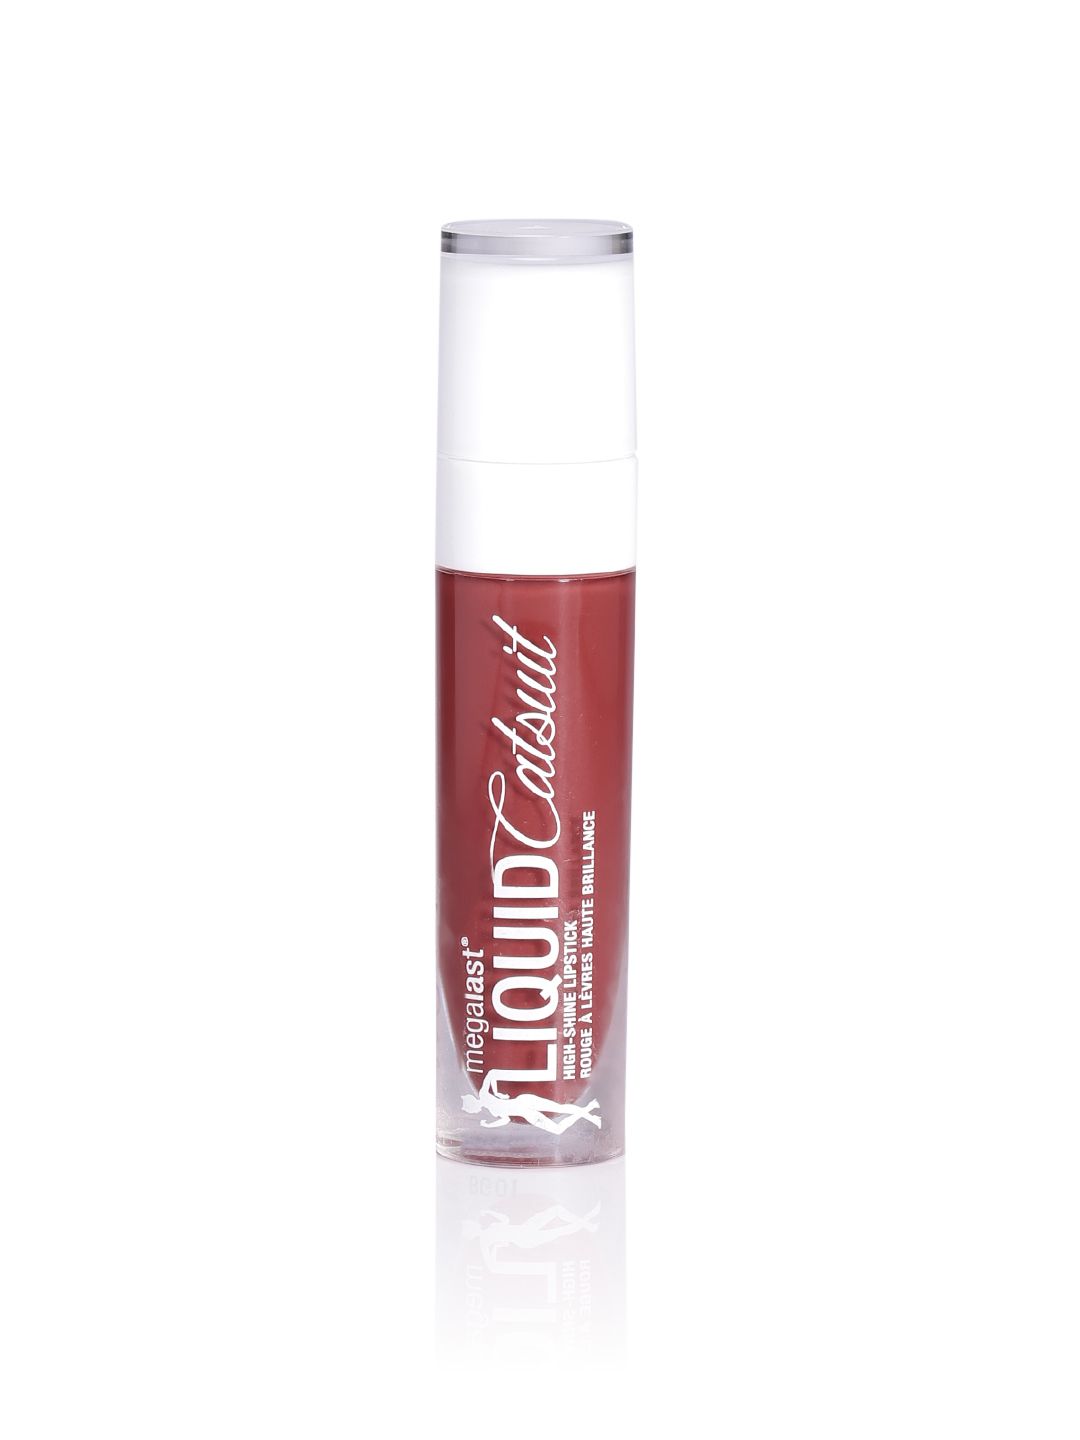 Wet n Wild Sustainable MegaLast Liquid Catsuit High Shine Lipstick - Wine Is The Answer E969A 5.7 g Price in India